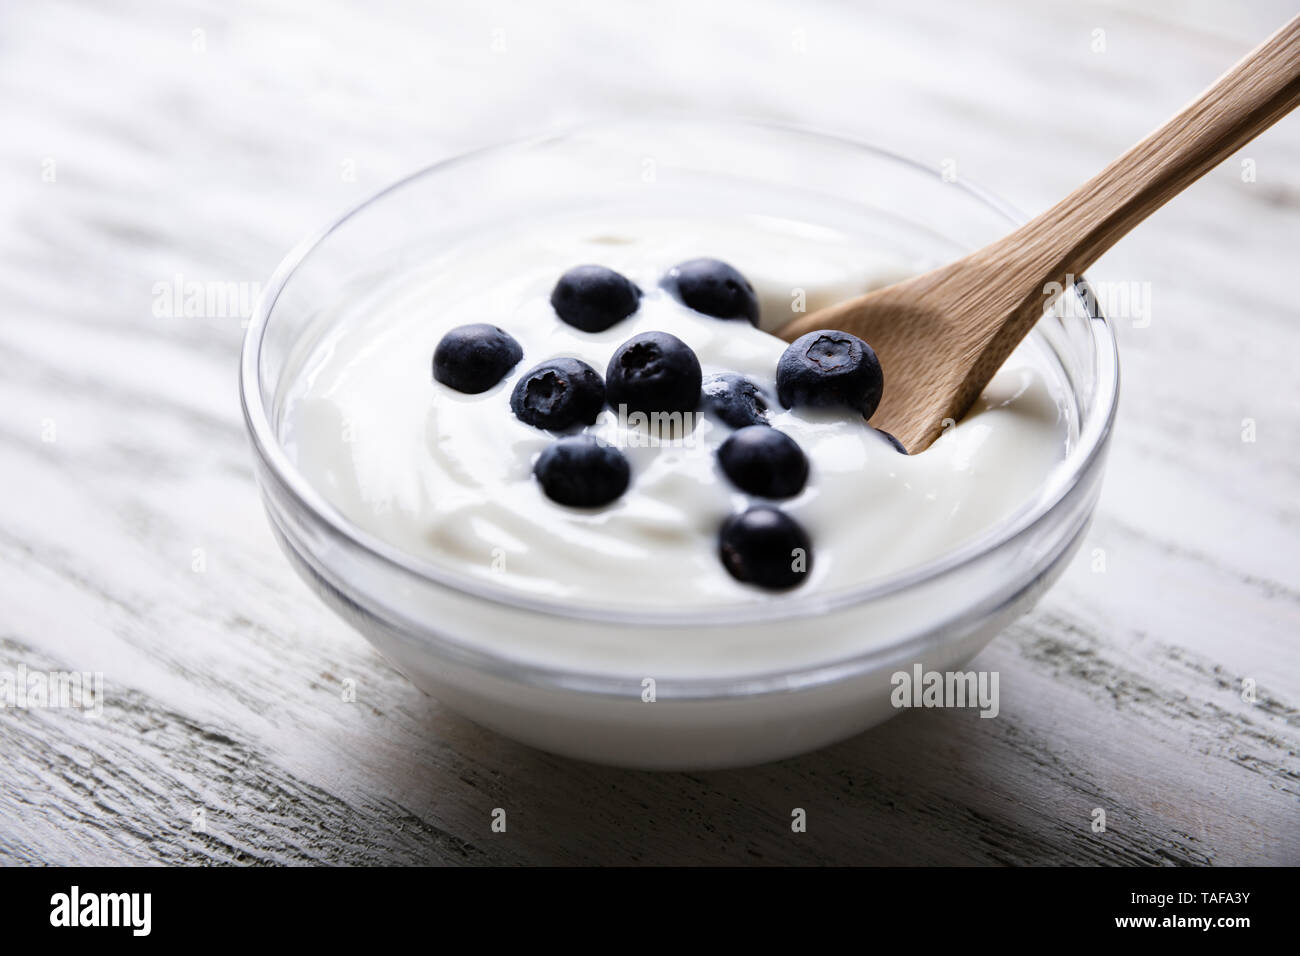 White Yogurt In Bowl With Blueberries Near Wooden Spoon Over Desk Stock Photo